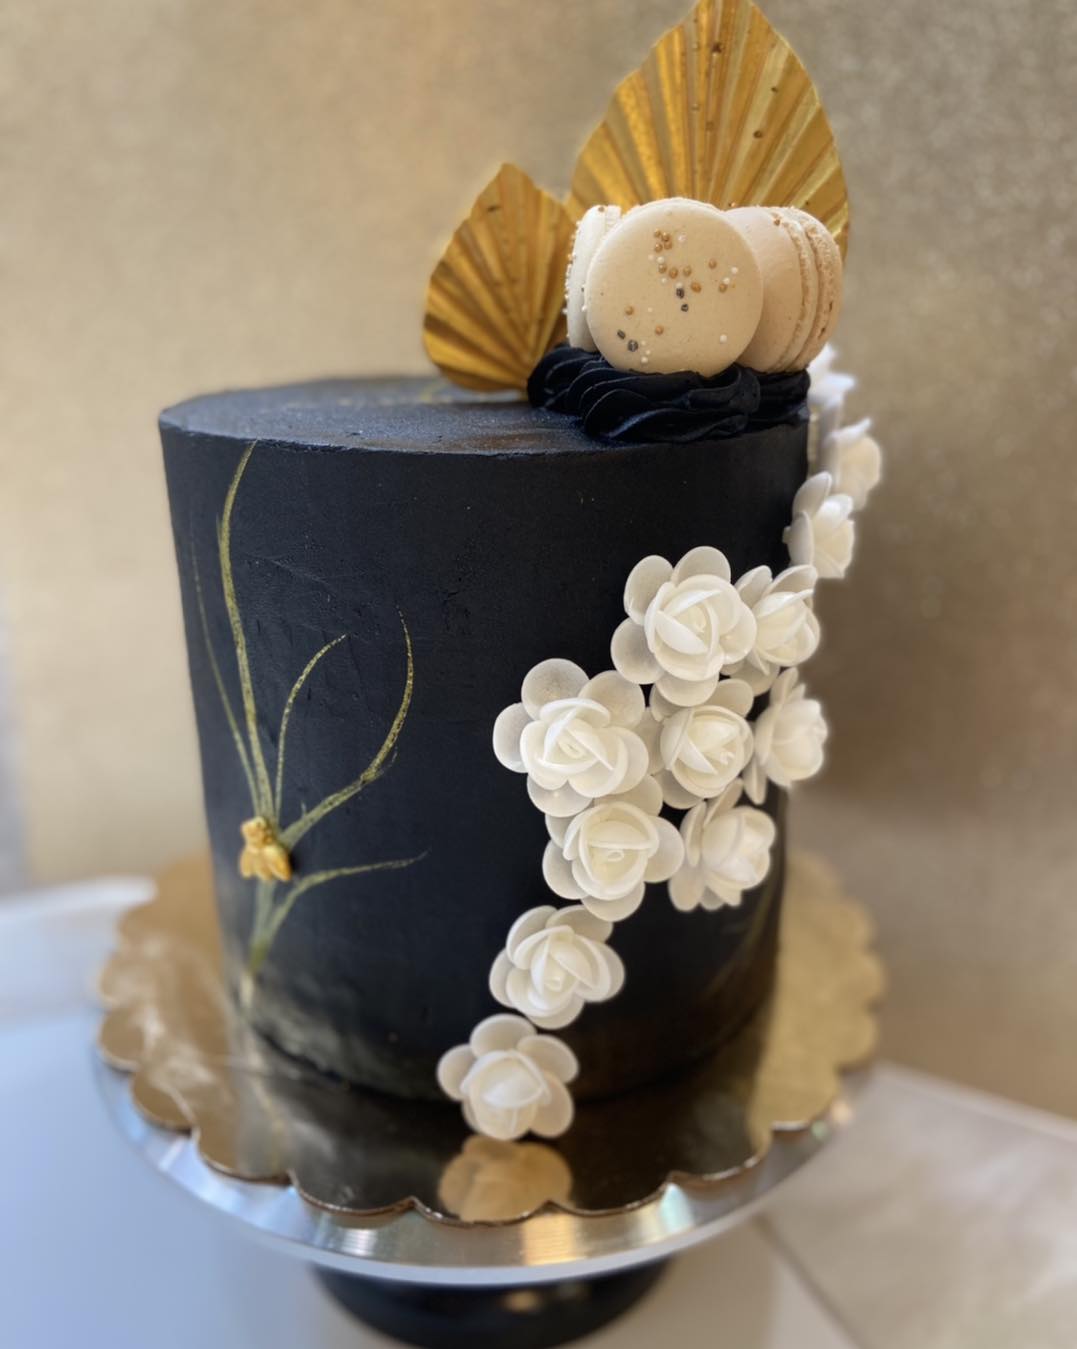 A black cake decorated with white flowers and macarons